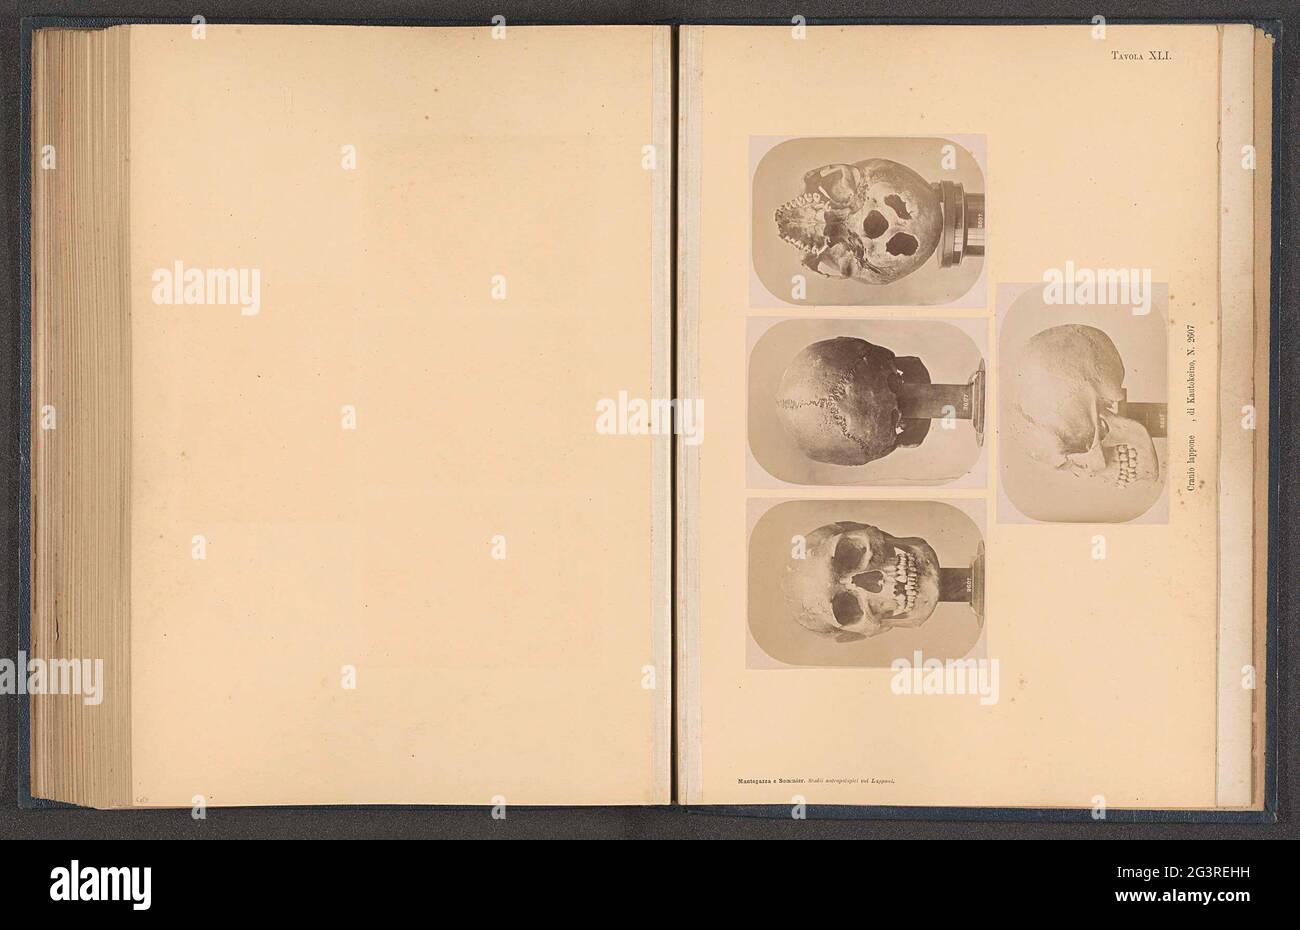 Four images of a samic skull; Cranio Lappone, di Kautokino, N. 2607. At the top left a front view, in the middle of a rear view, at the top right of a view of the bottom, under a side view. Stock Photo